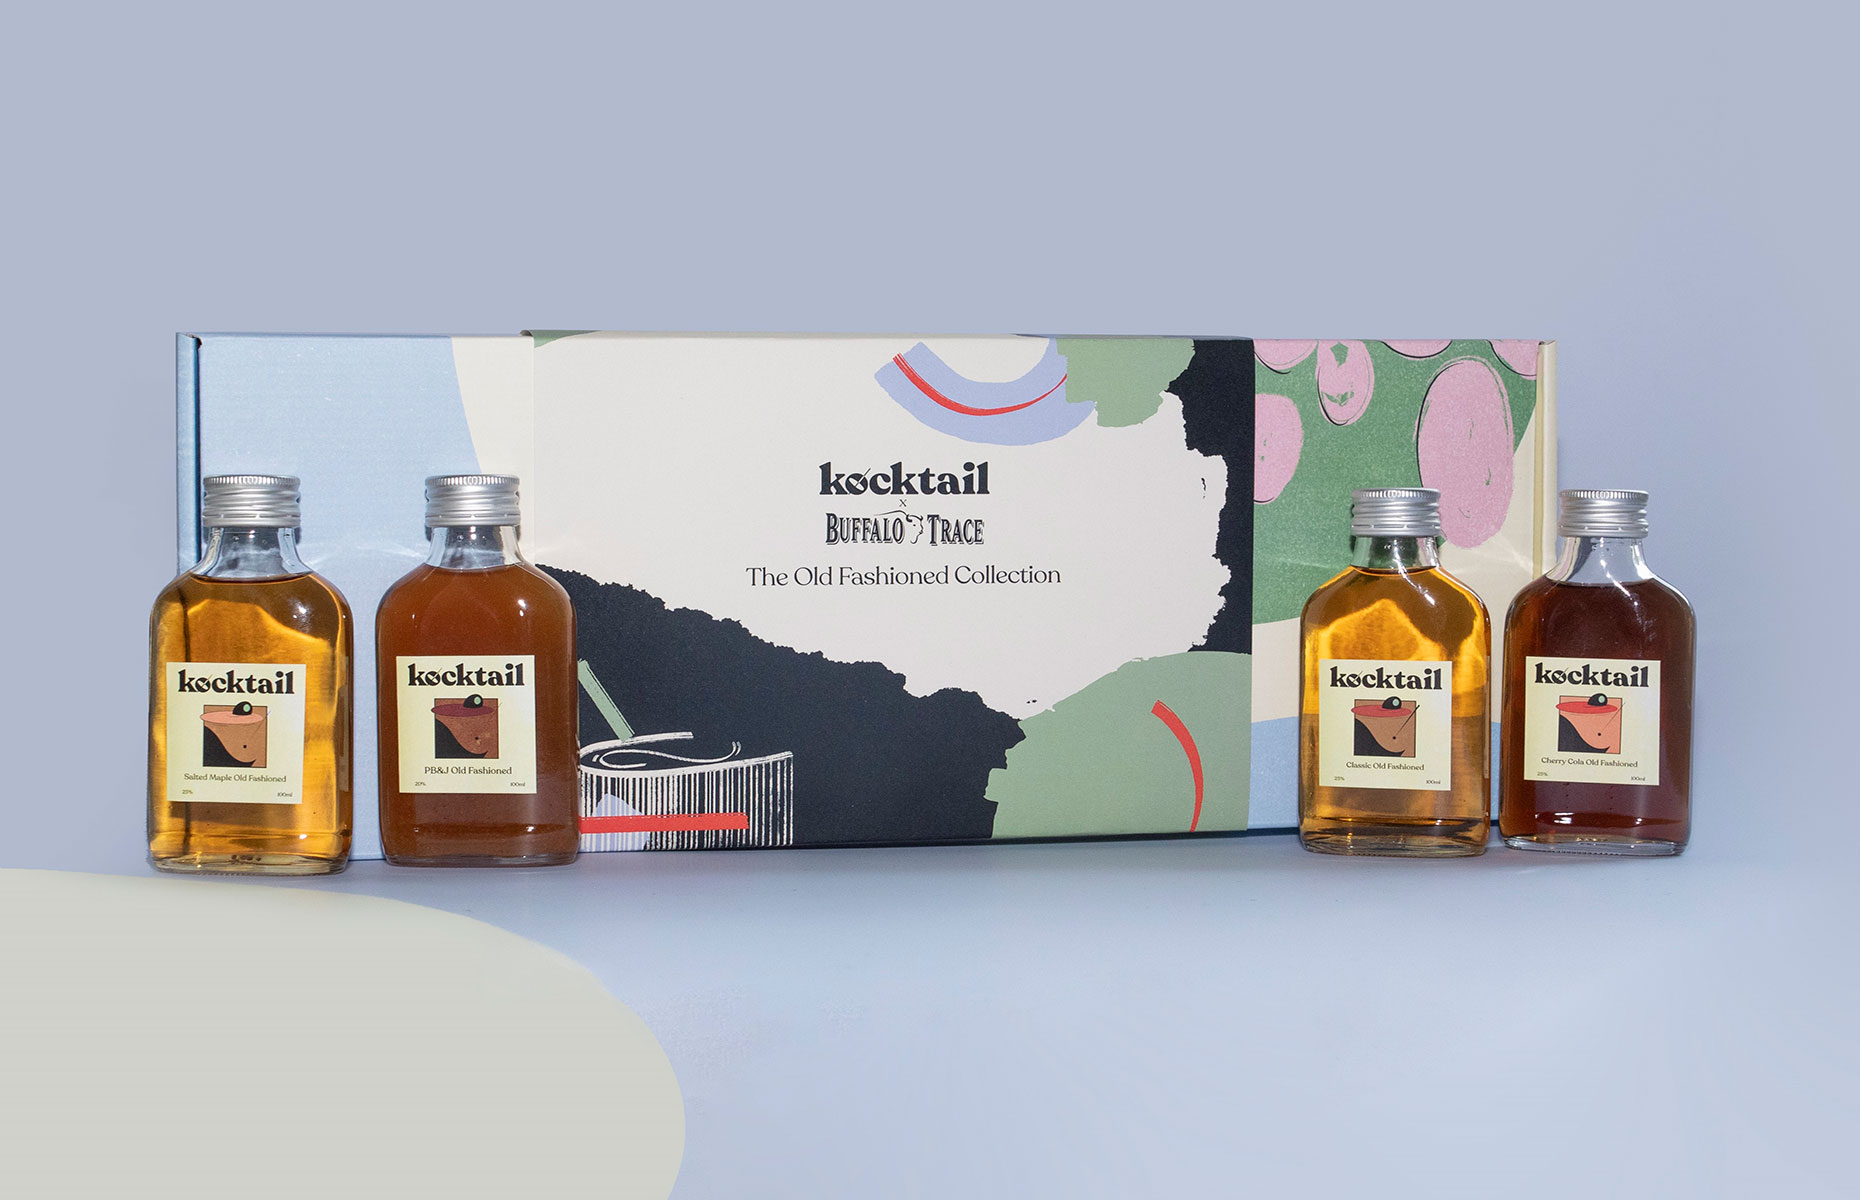 Kocktail The Old Fashioned Collection (Image courtesy of Kocktail)